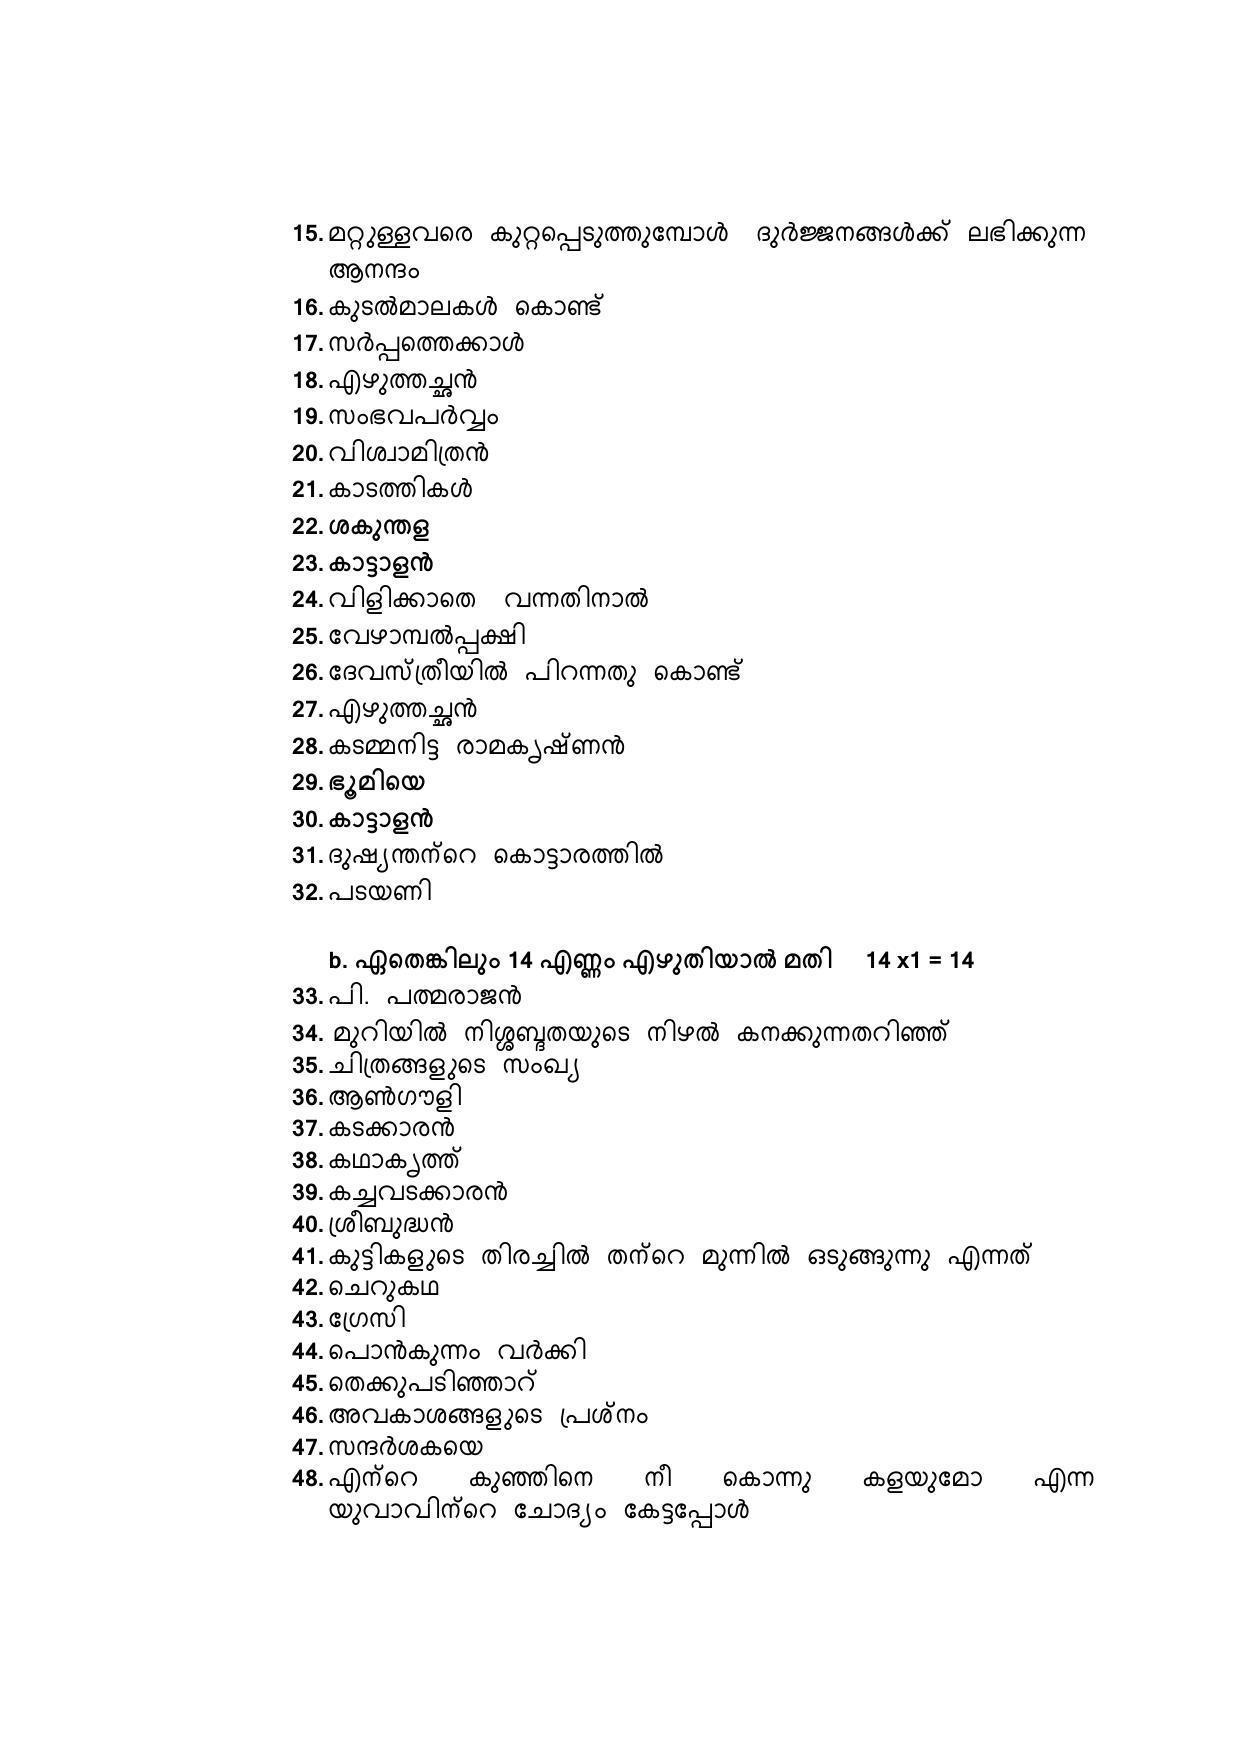 CBSE Class 12 Malayalam Marking Scheme and Solutions 2021-22 - Page 2